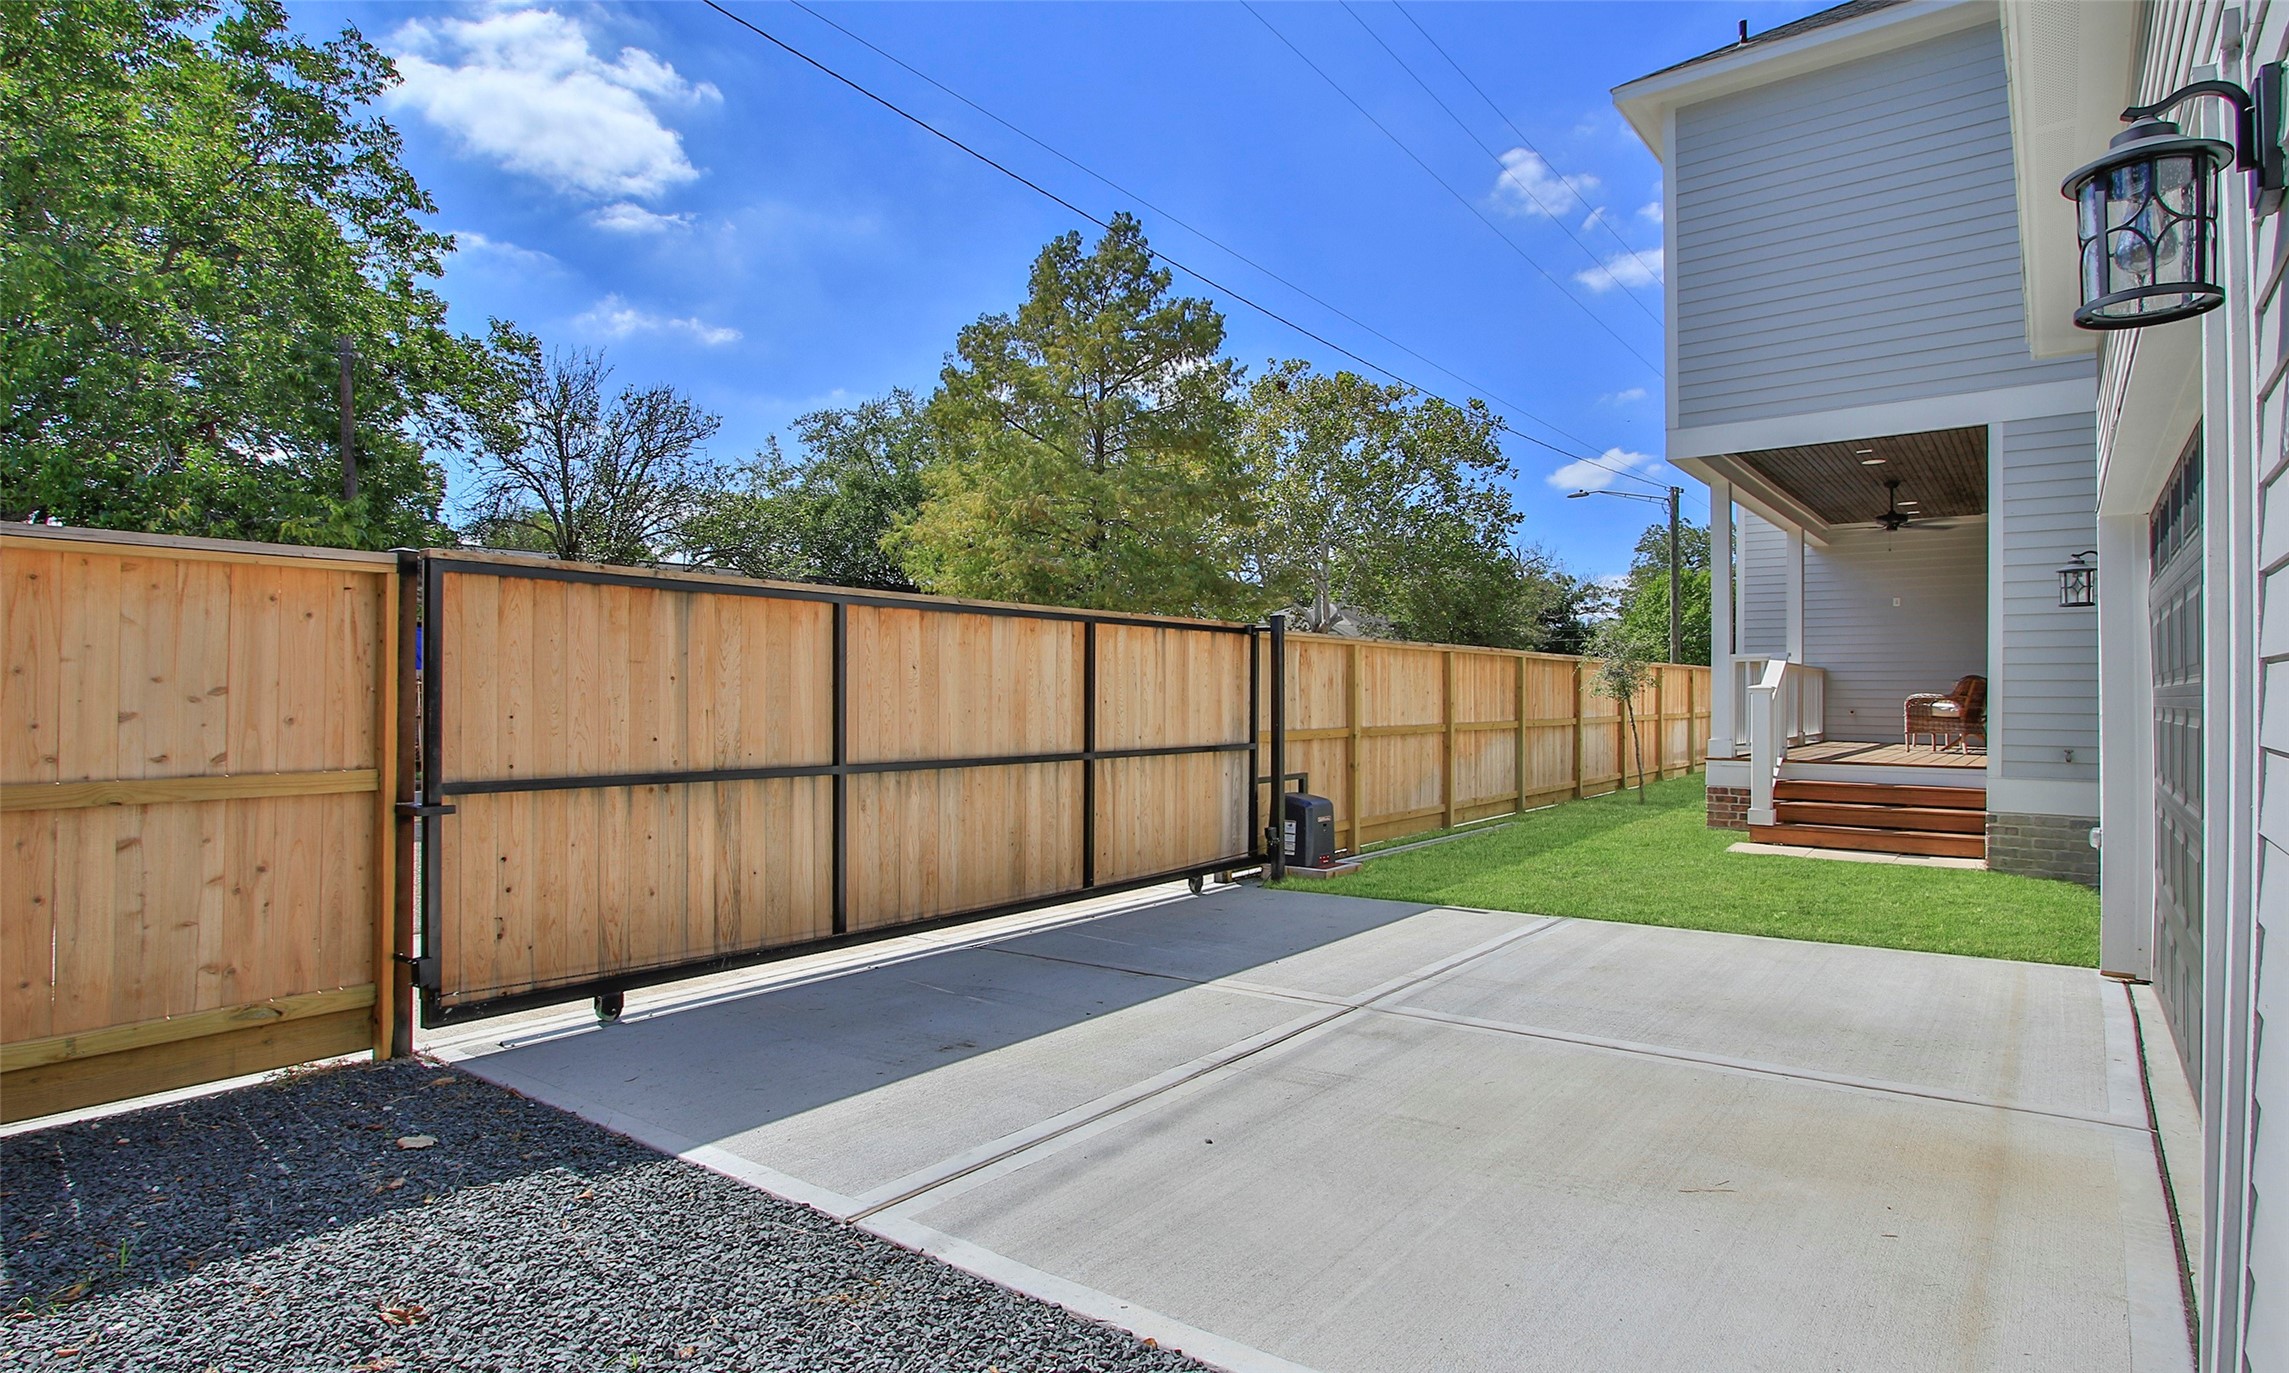 Privacy fence with rolling gate and automatic gate opener